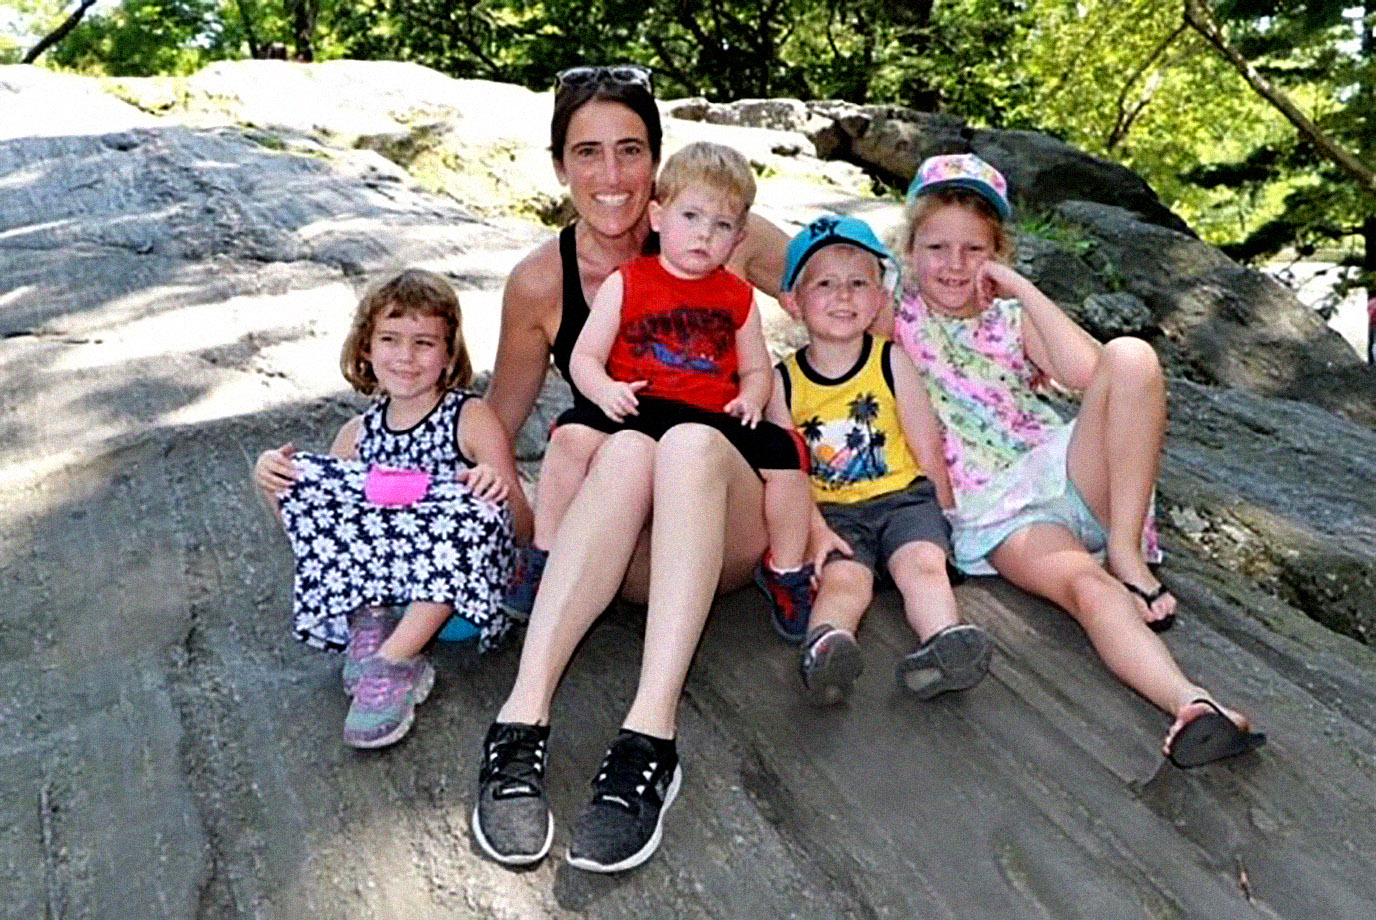 PHOTO: Melissa Servetz adopted her four children Jade, Destiny, Emerson and Mathew, all siblings, between 2017 and 2021.